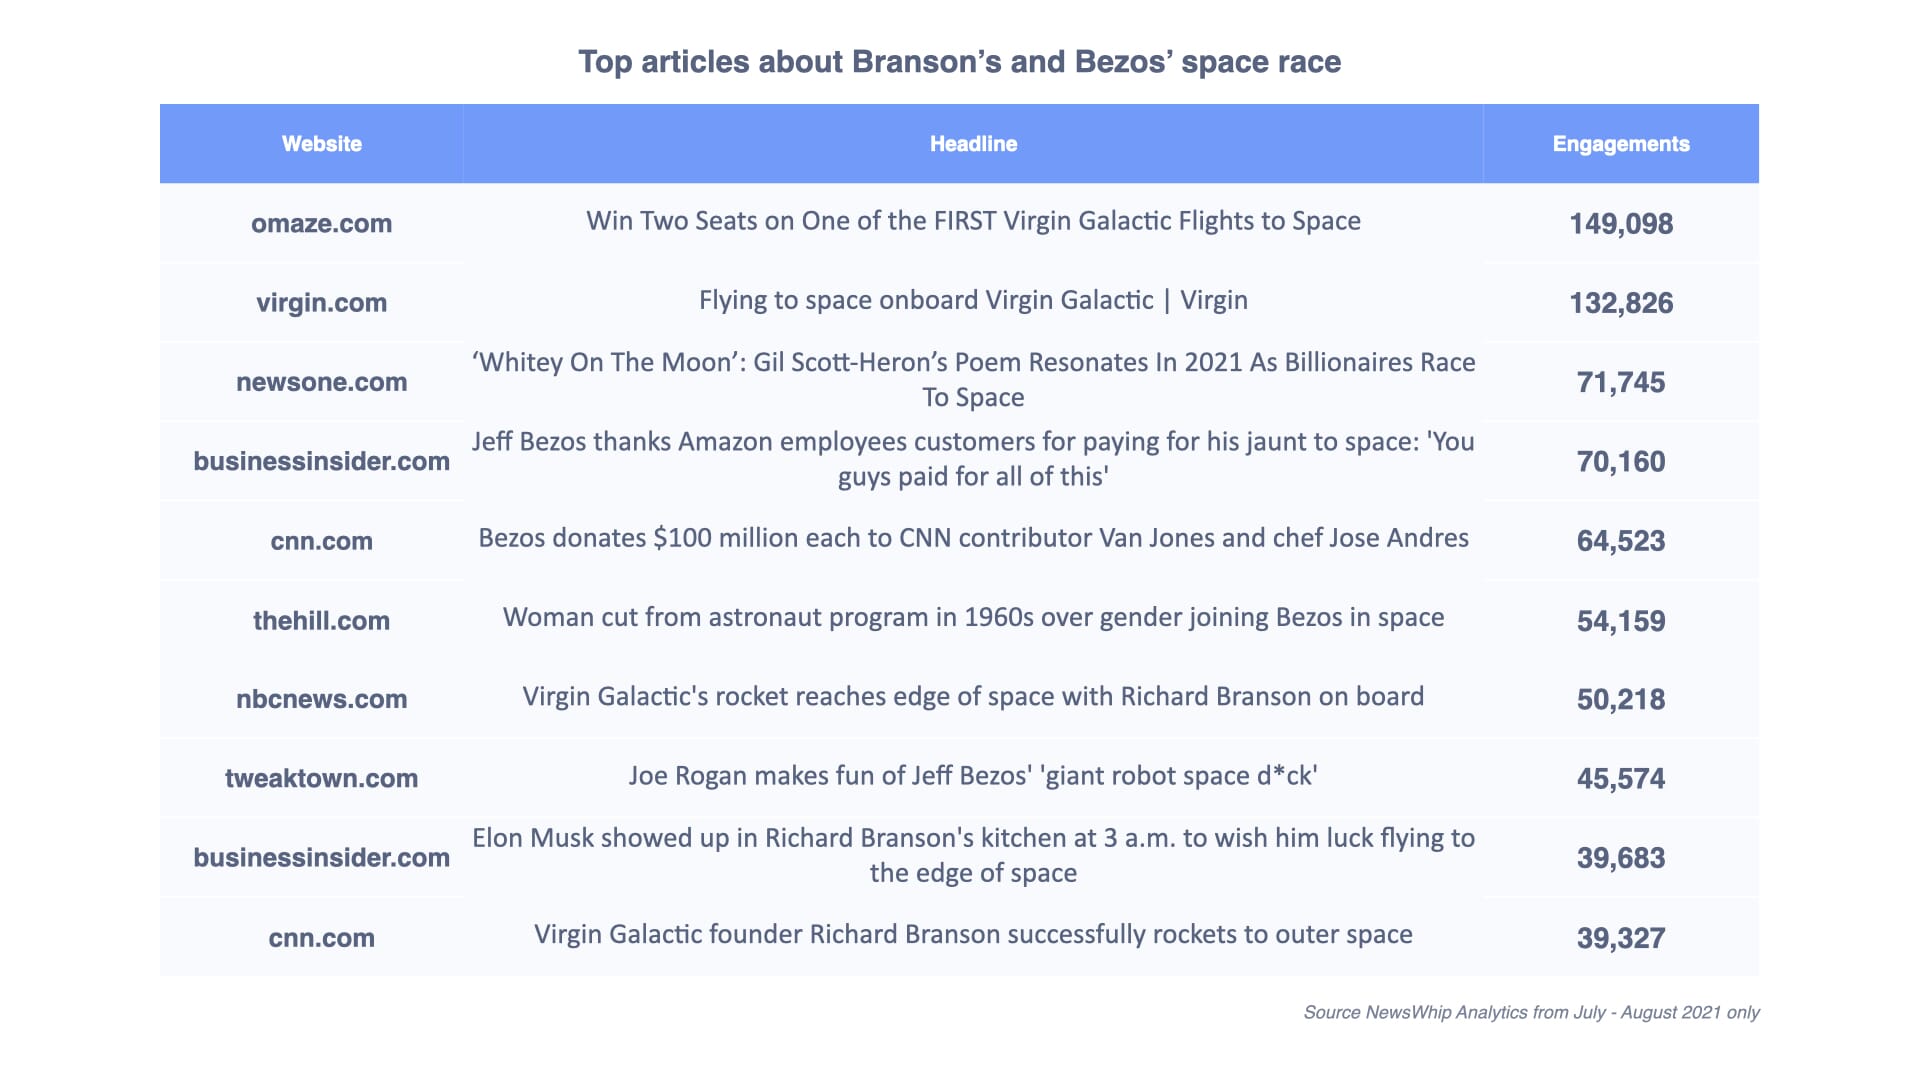 Table showing the top articles about the space race between Jeff Bezos, and Richard Branson.